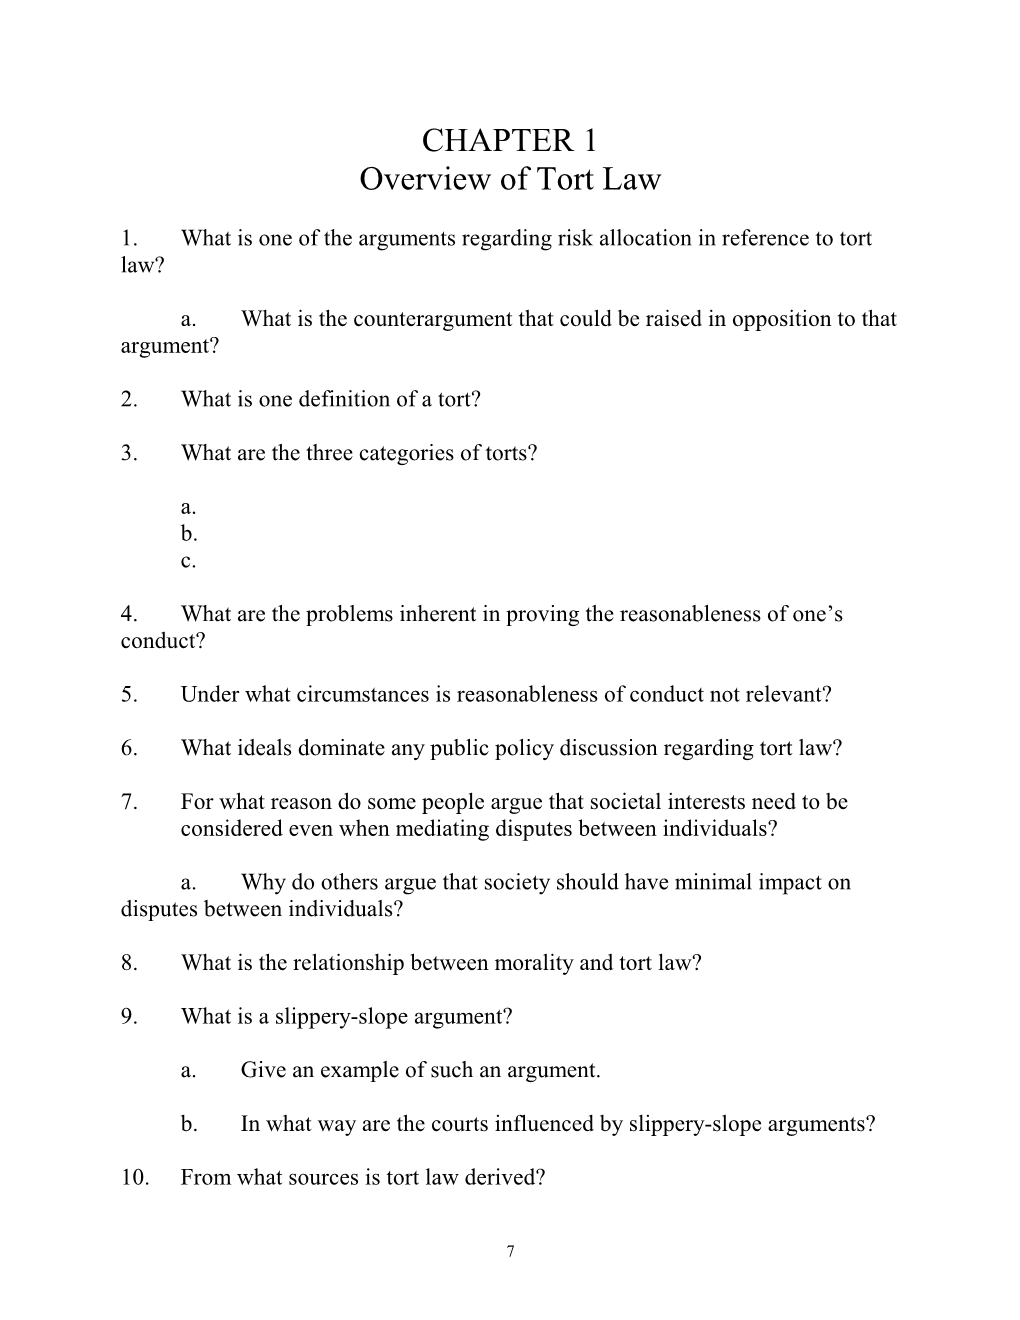 CHAPTER 1 Overview of Tort Law